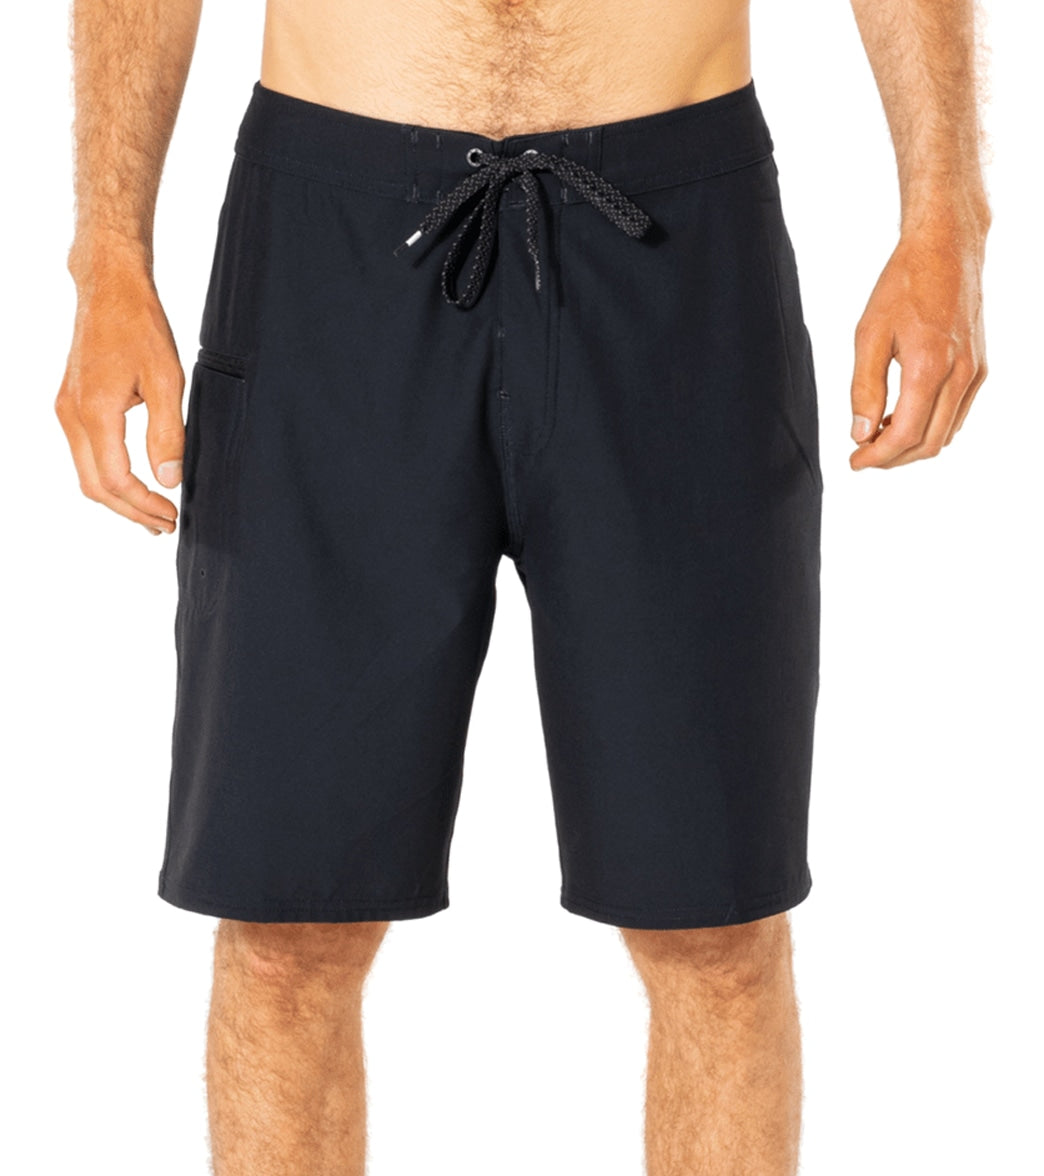 A pair of black men's board shorts. The image highlights the design and fit of the shorts, focusing on features such as the drawstring waistband, knee-length cut, and side pocket.